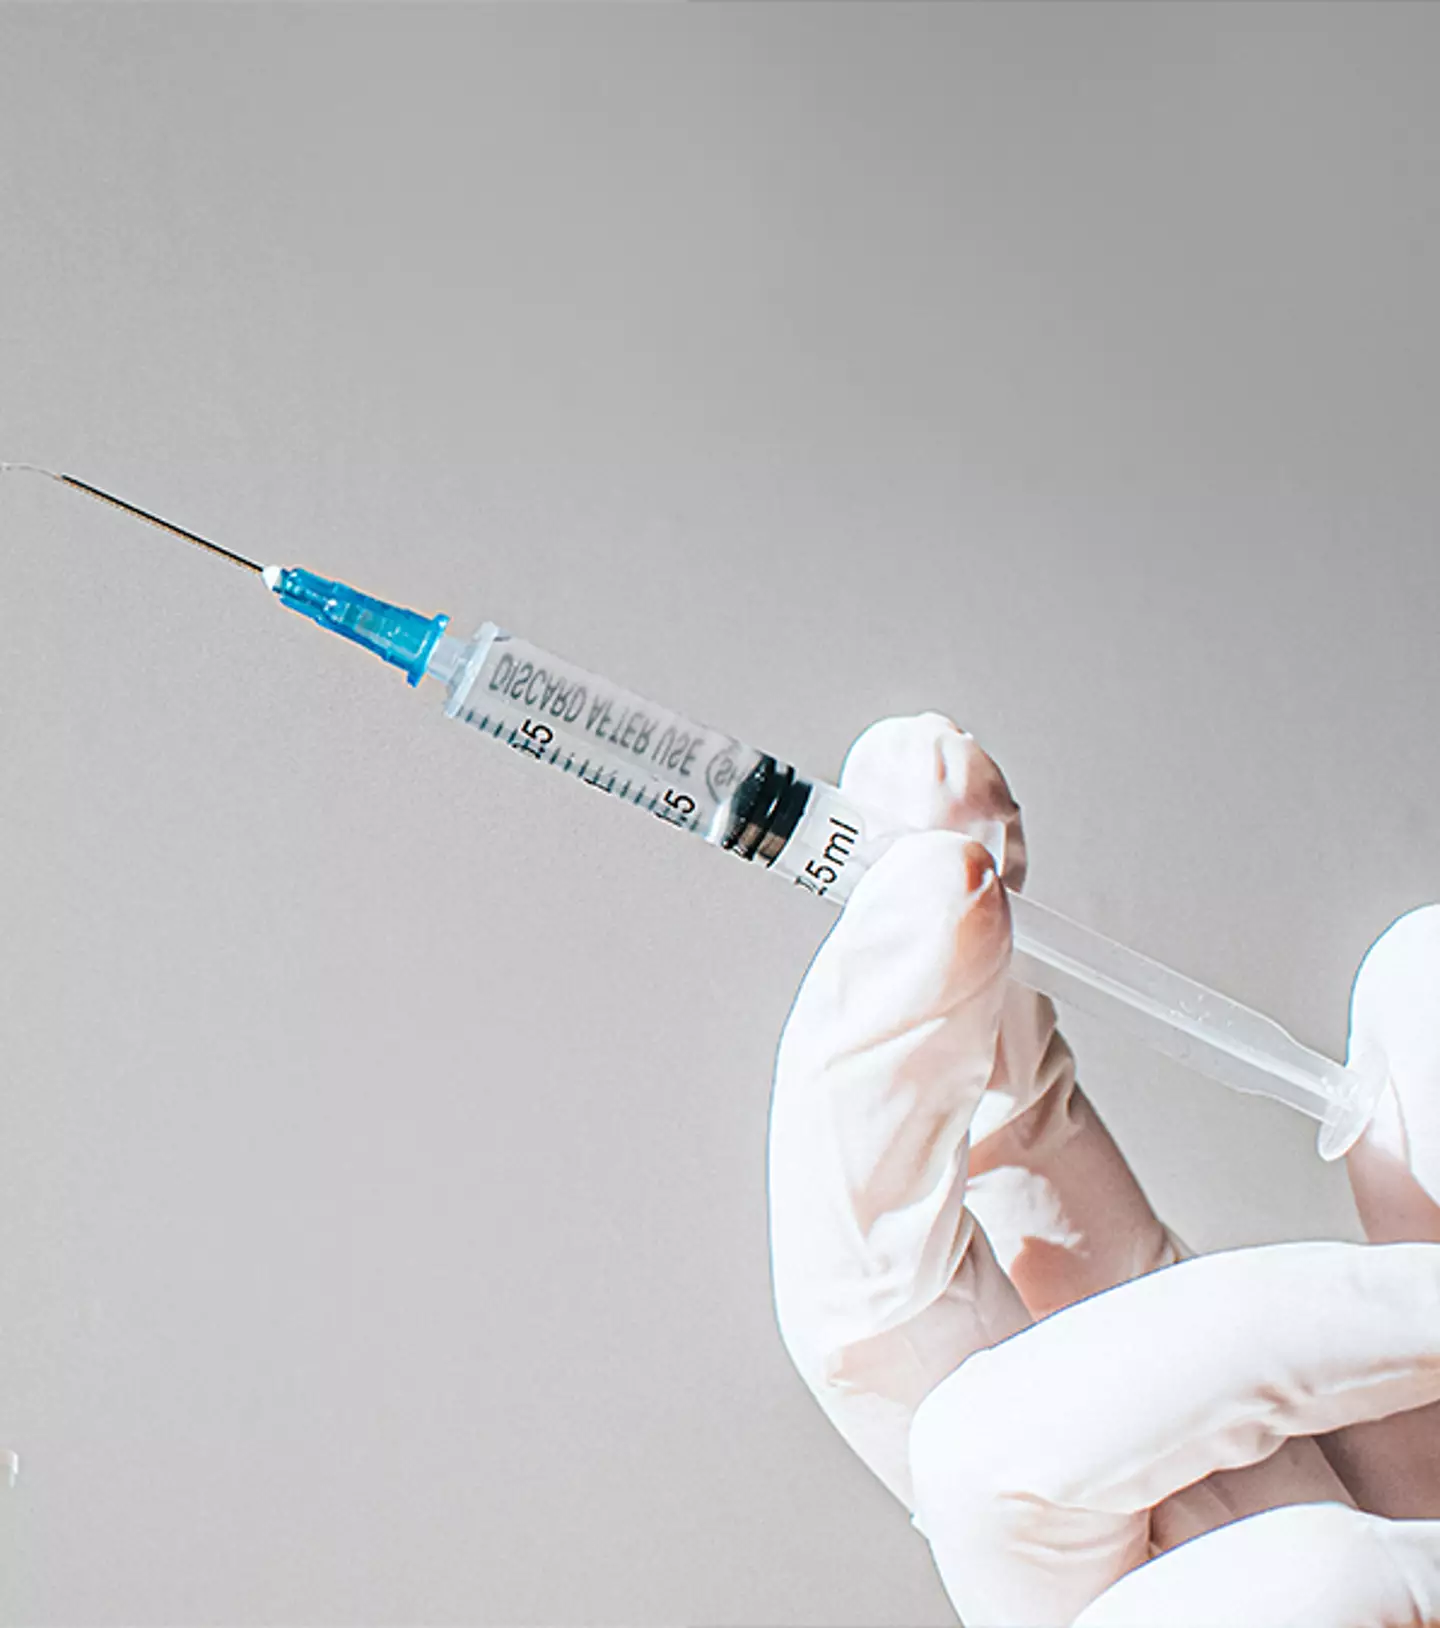 The vaccine targets neoantigens in the body / Catherine Falls Commercial / Getty